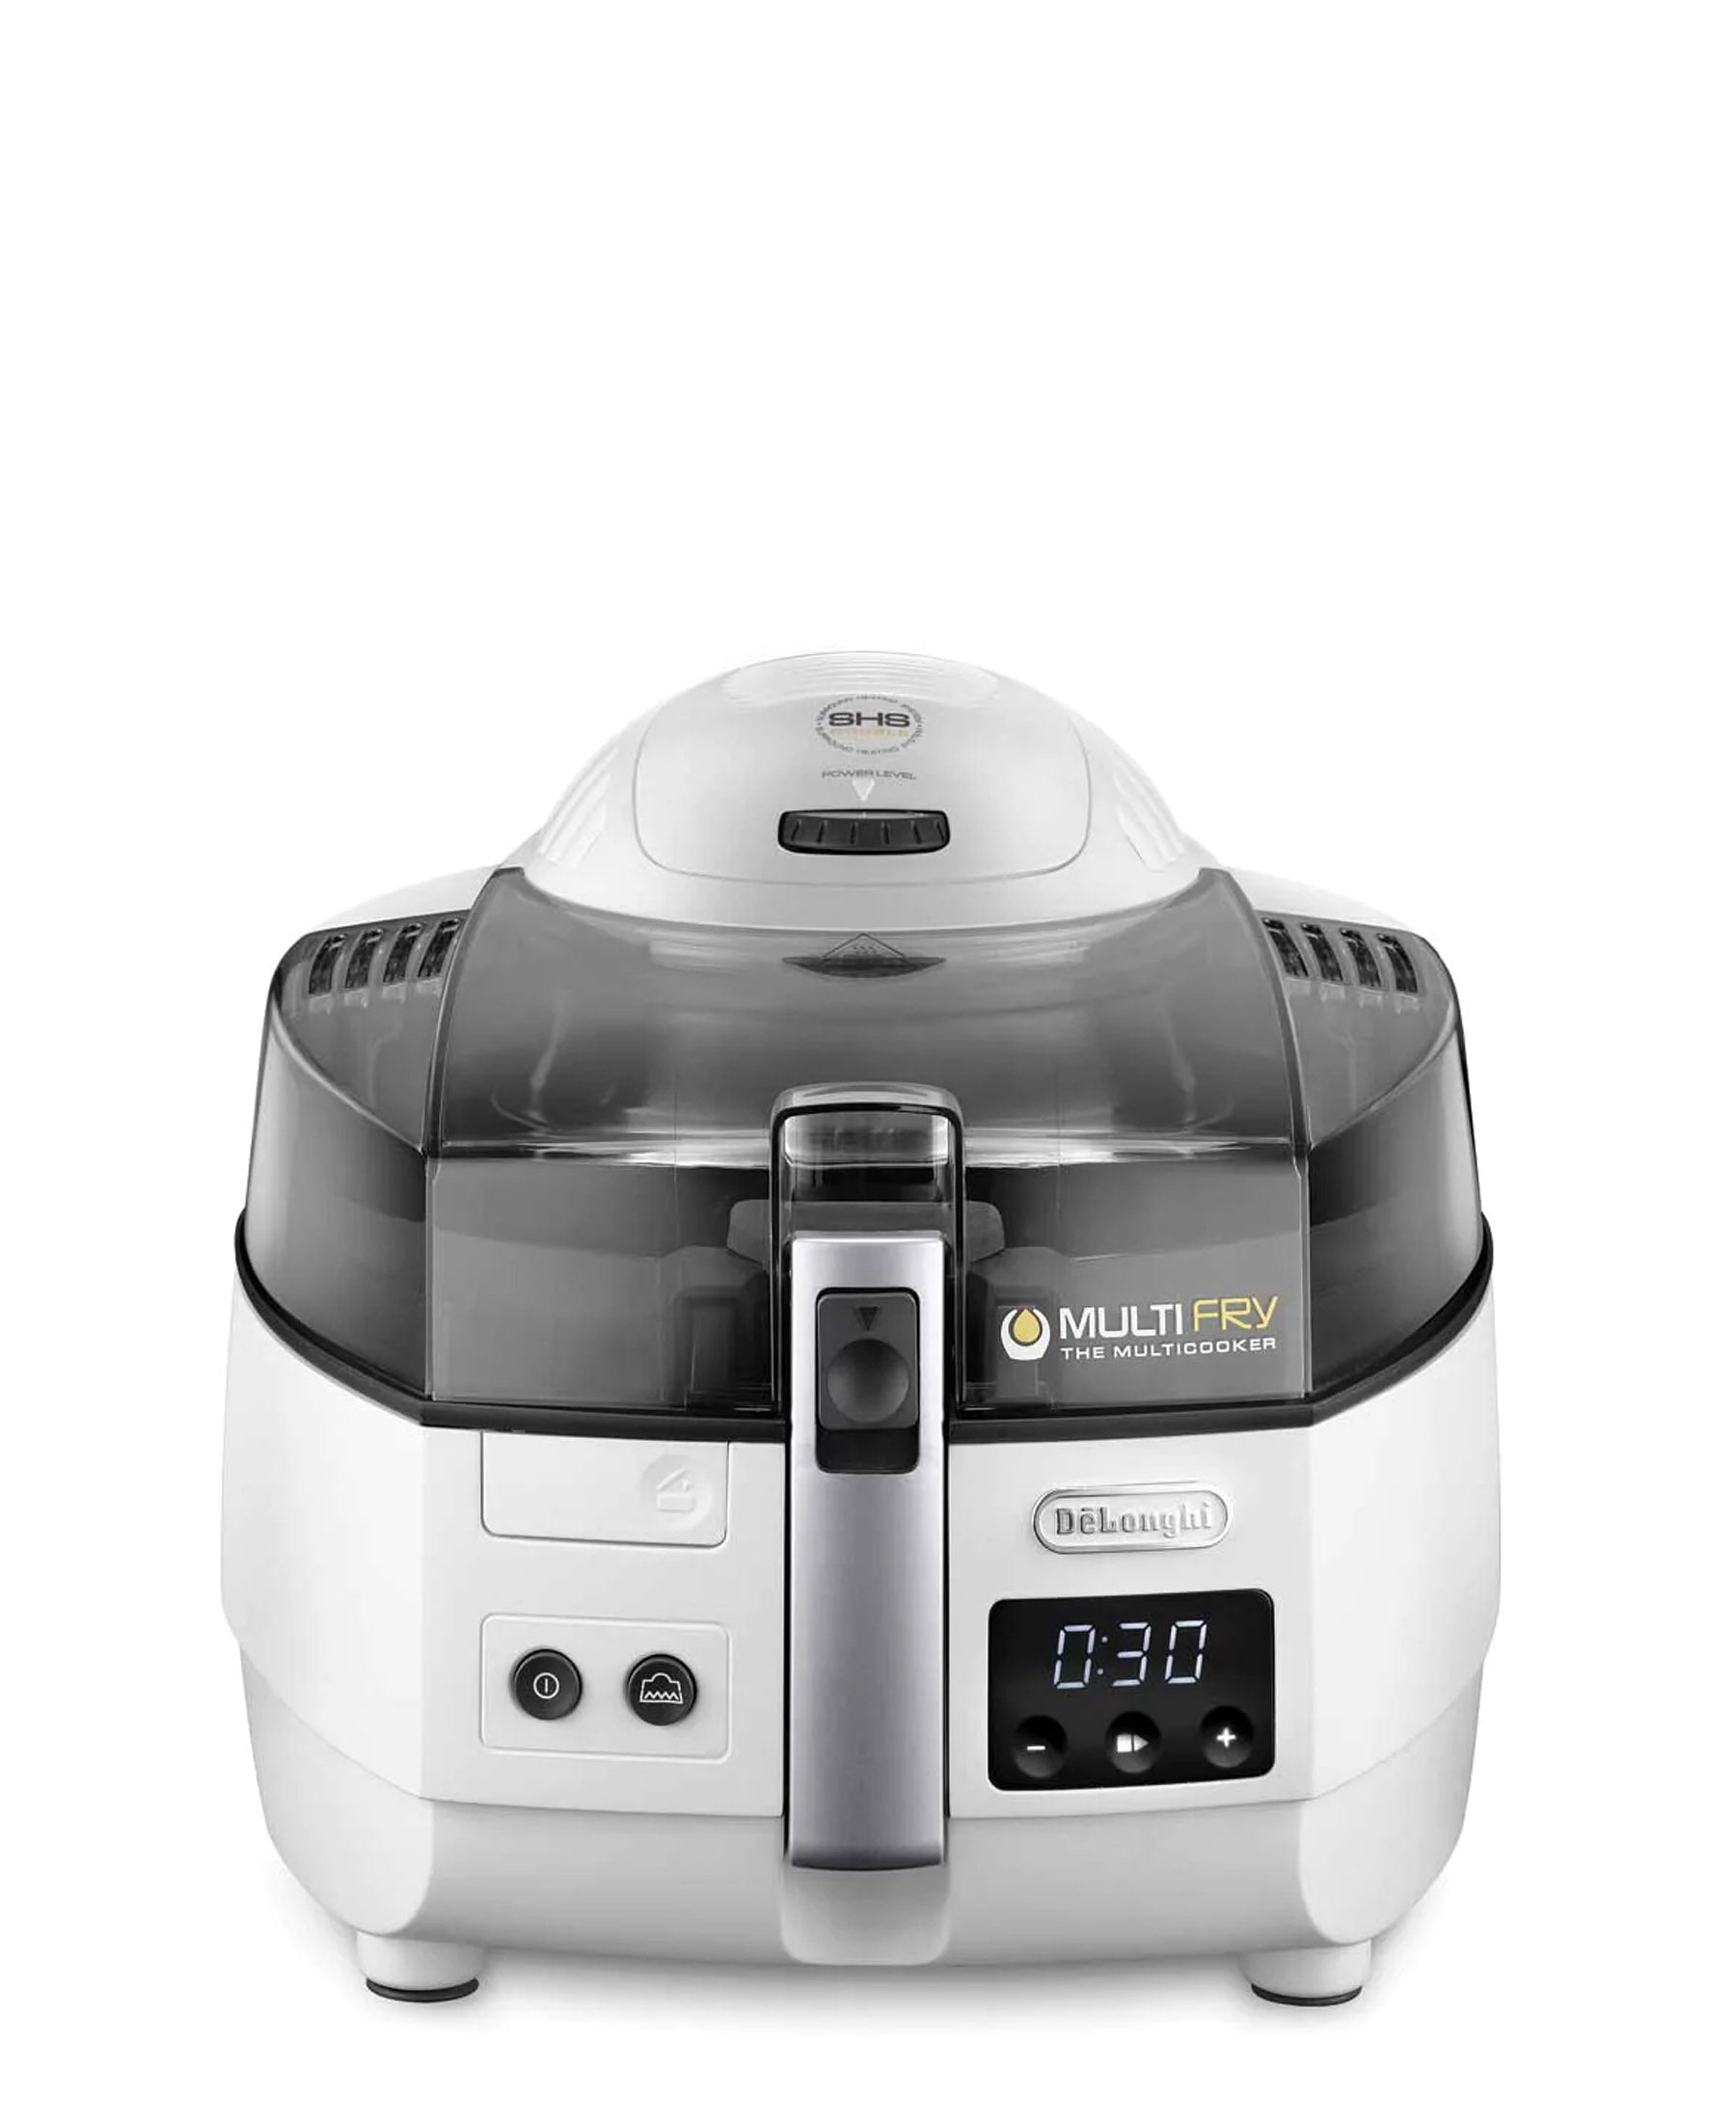 DeLonghi Multifry Extra Multicooker- White & Grey